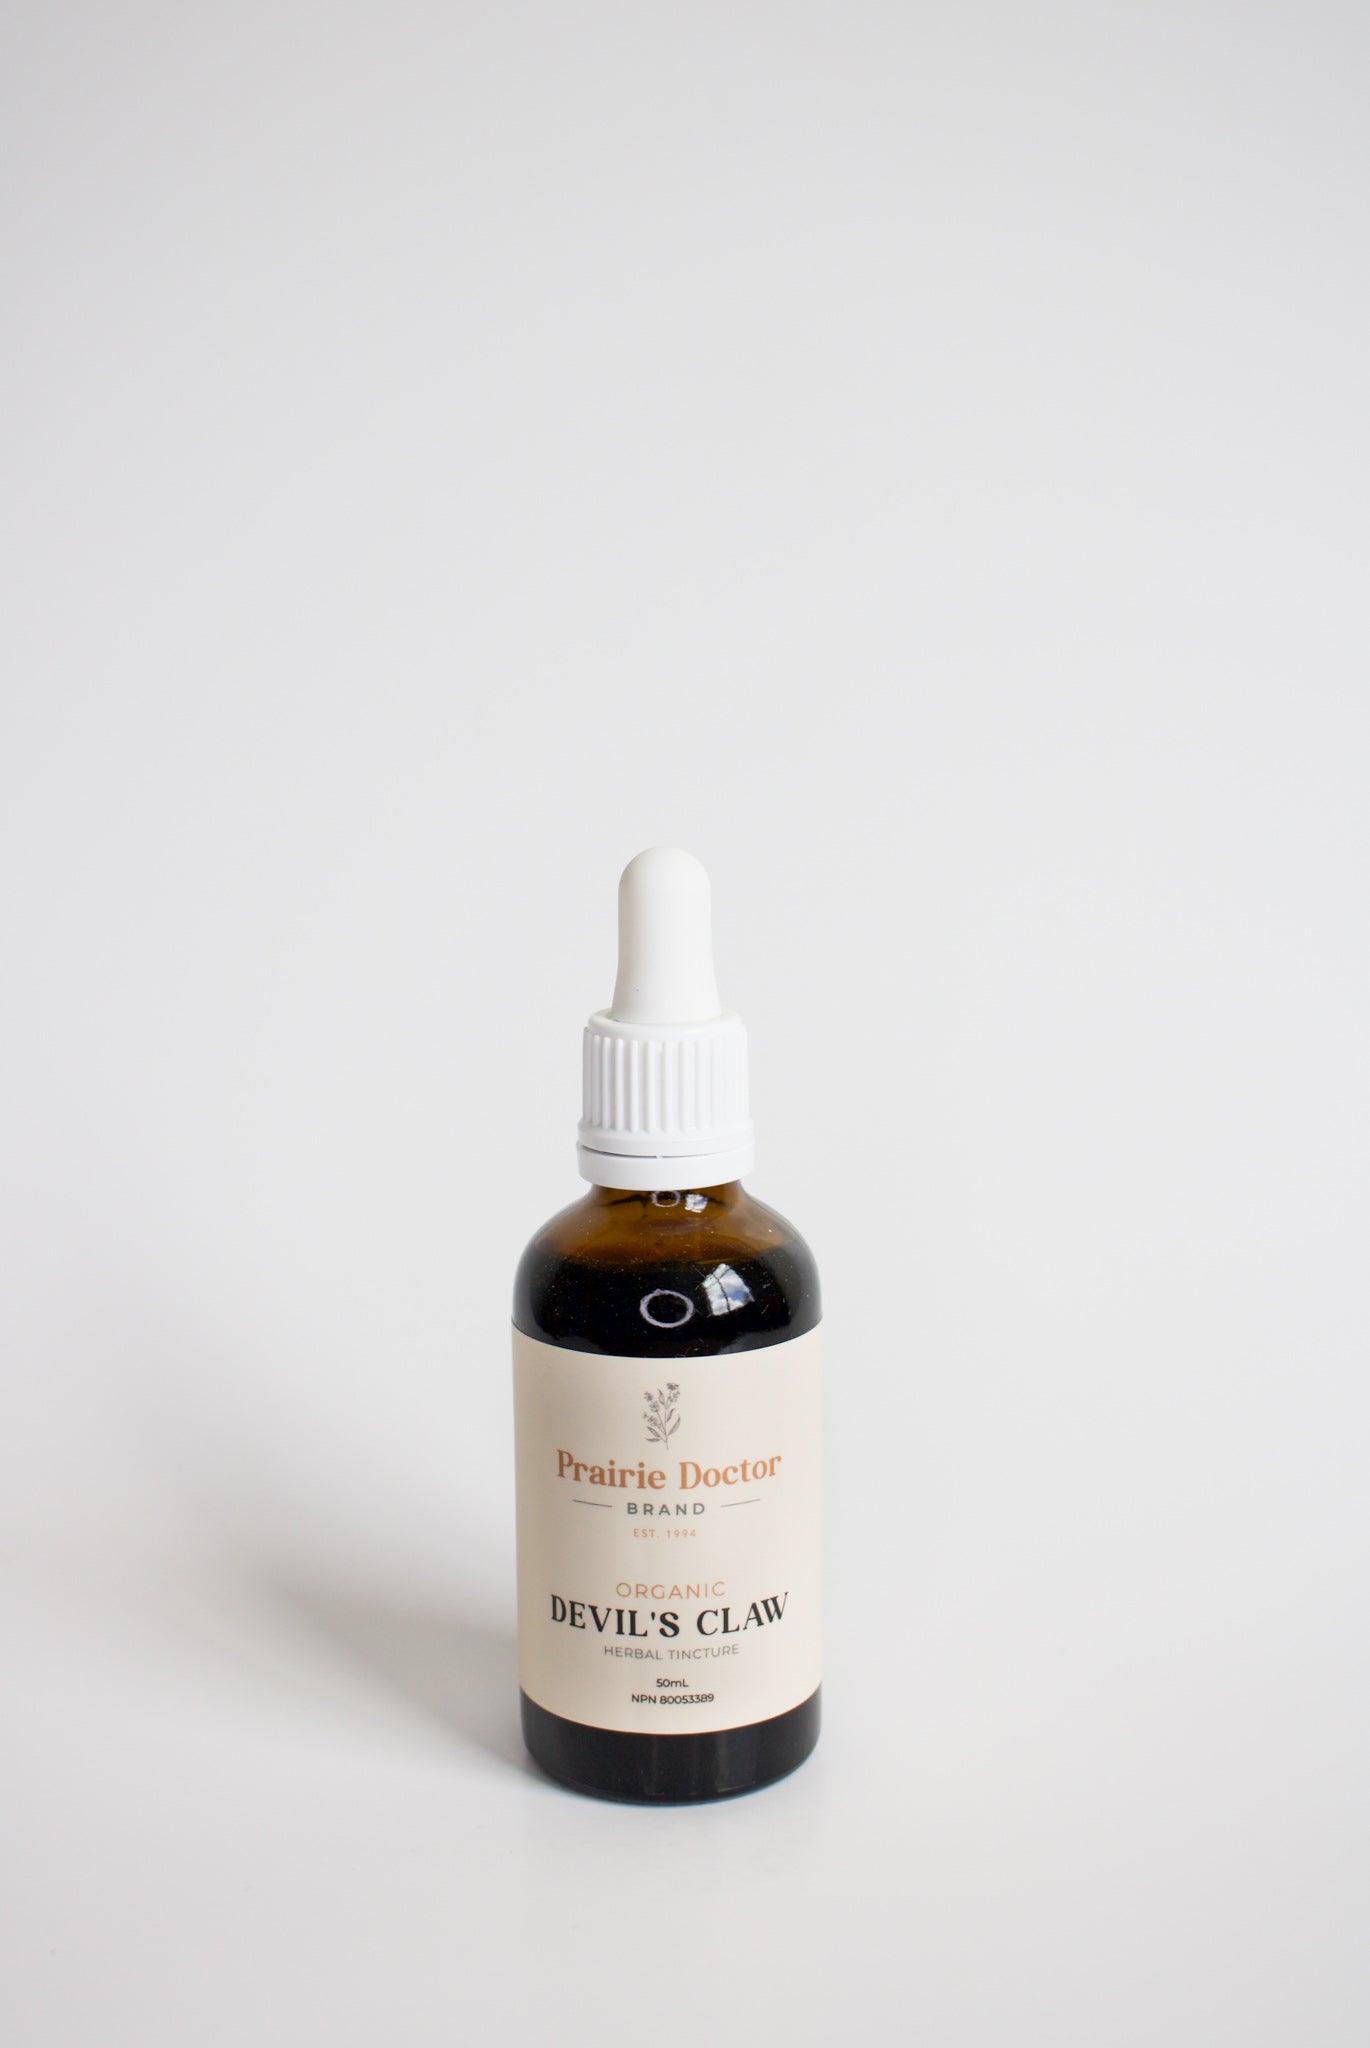 Our organic devils claw herbal tincture has traditionally been used in Herbal Medicine as a bitter to:  Help stimulate appetite To help relieve digestive upset/indigestion. Devils Claw is also used in Herbal Medicine to help relieve joint pain associated with osteoarthritis.